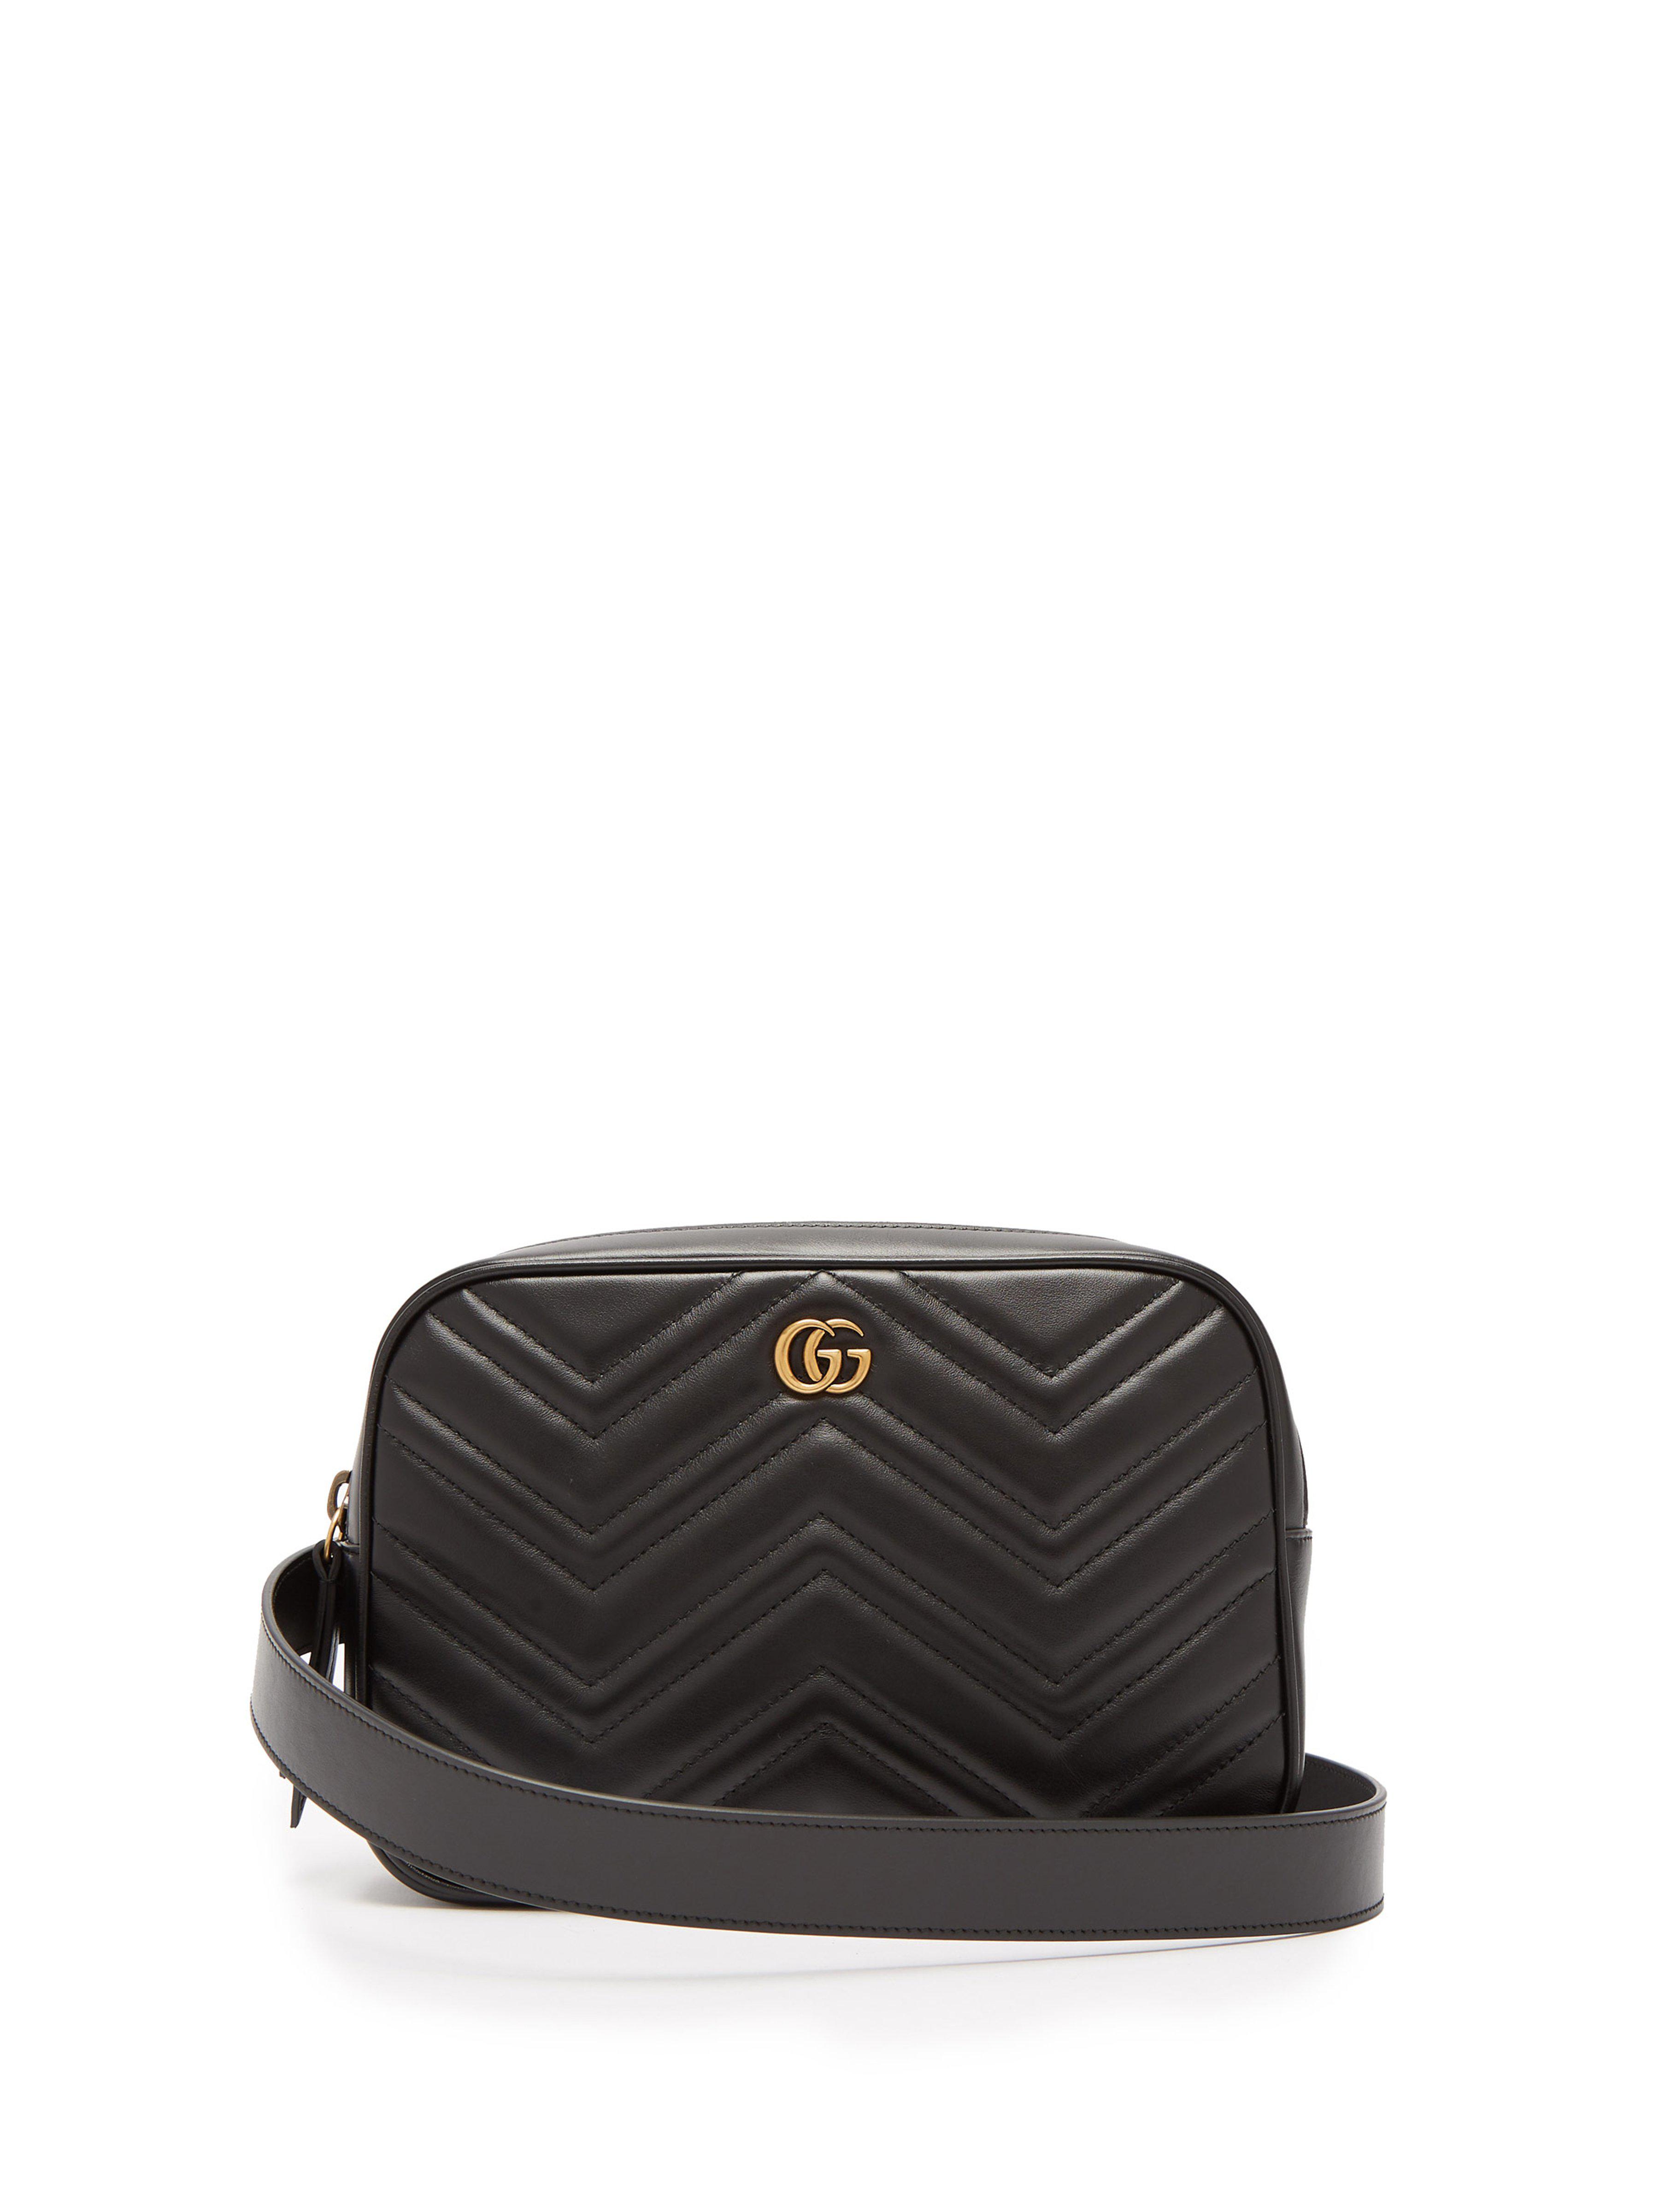 Gucci Gg Marmont Quilted Leather Belt Bag in Black for Men - Lyst